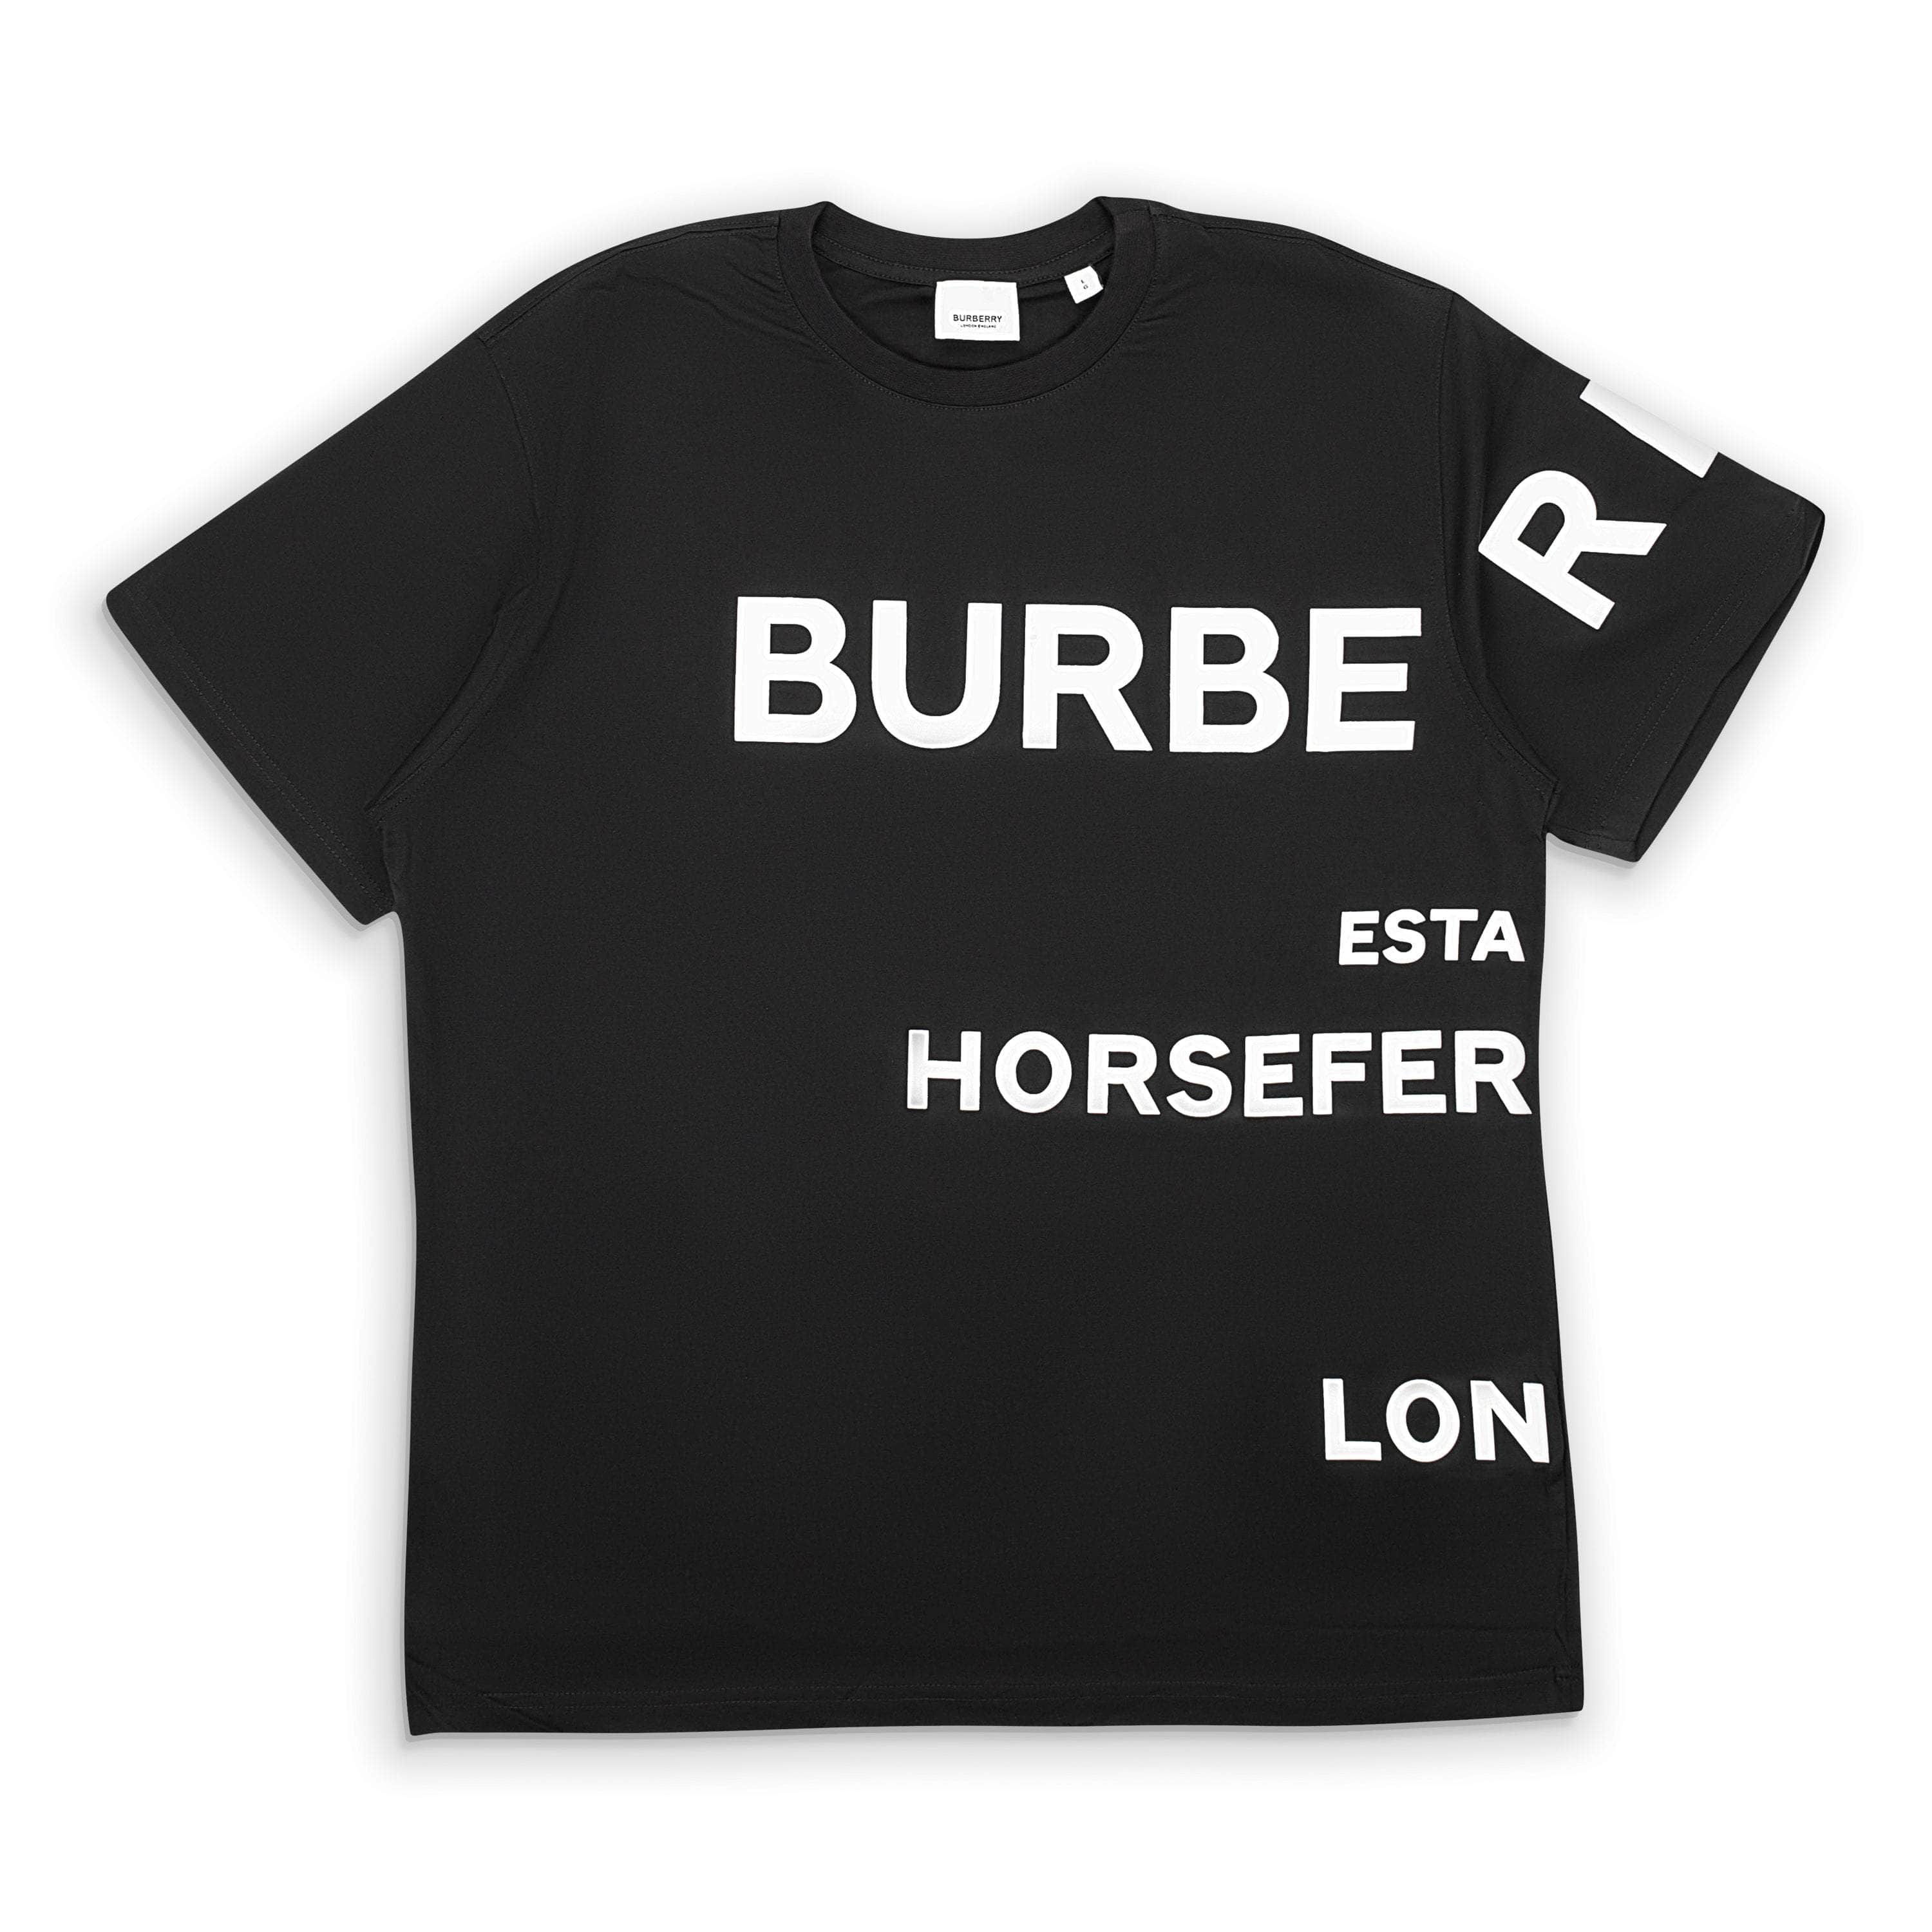 Burberry 250-500, burberry, channelenable-all, chicmi, couponcollection, main-clothing, shop375, Stadium Goods Black Printed Logo All Over Oversized T-Shirt